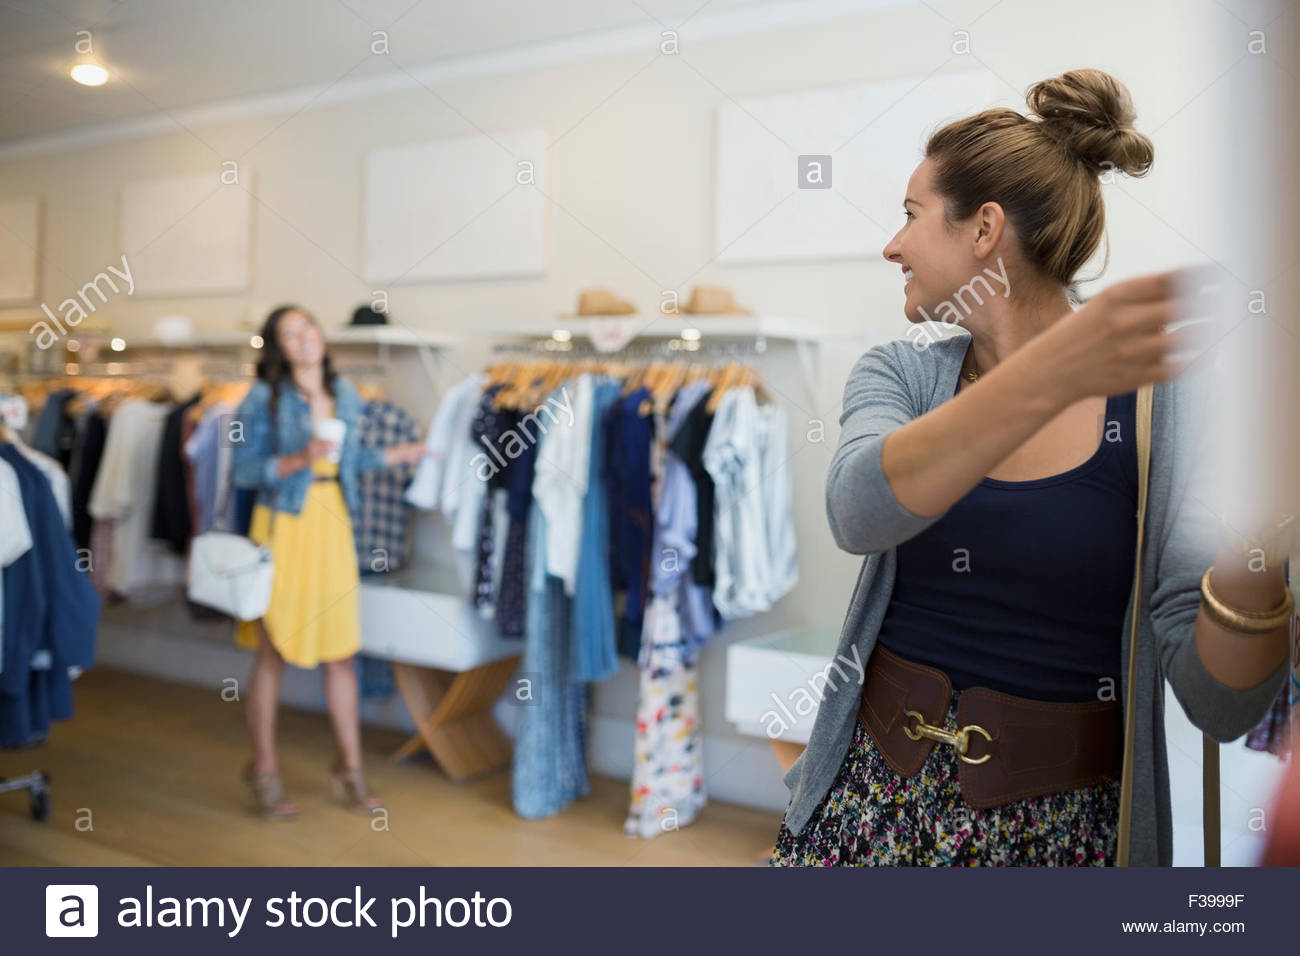 Woman browsing in clothing shop Stock Photo